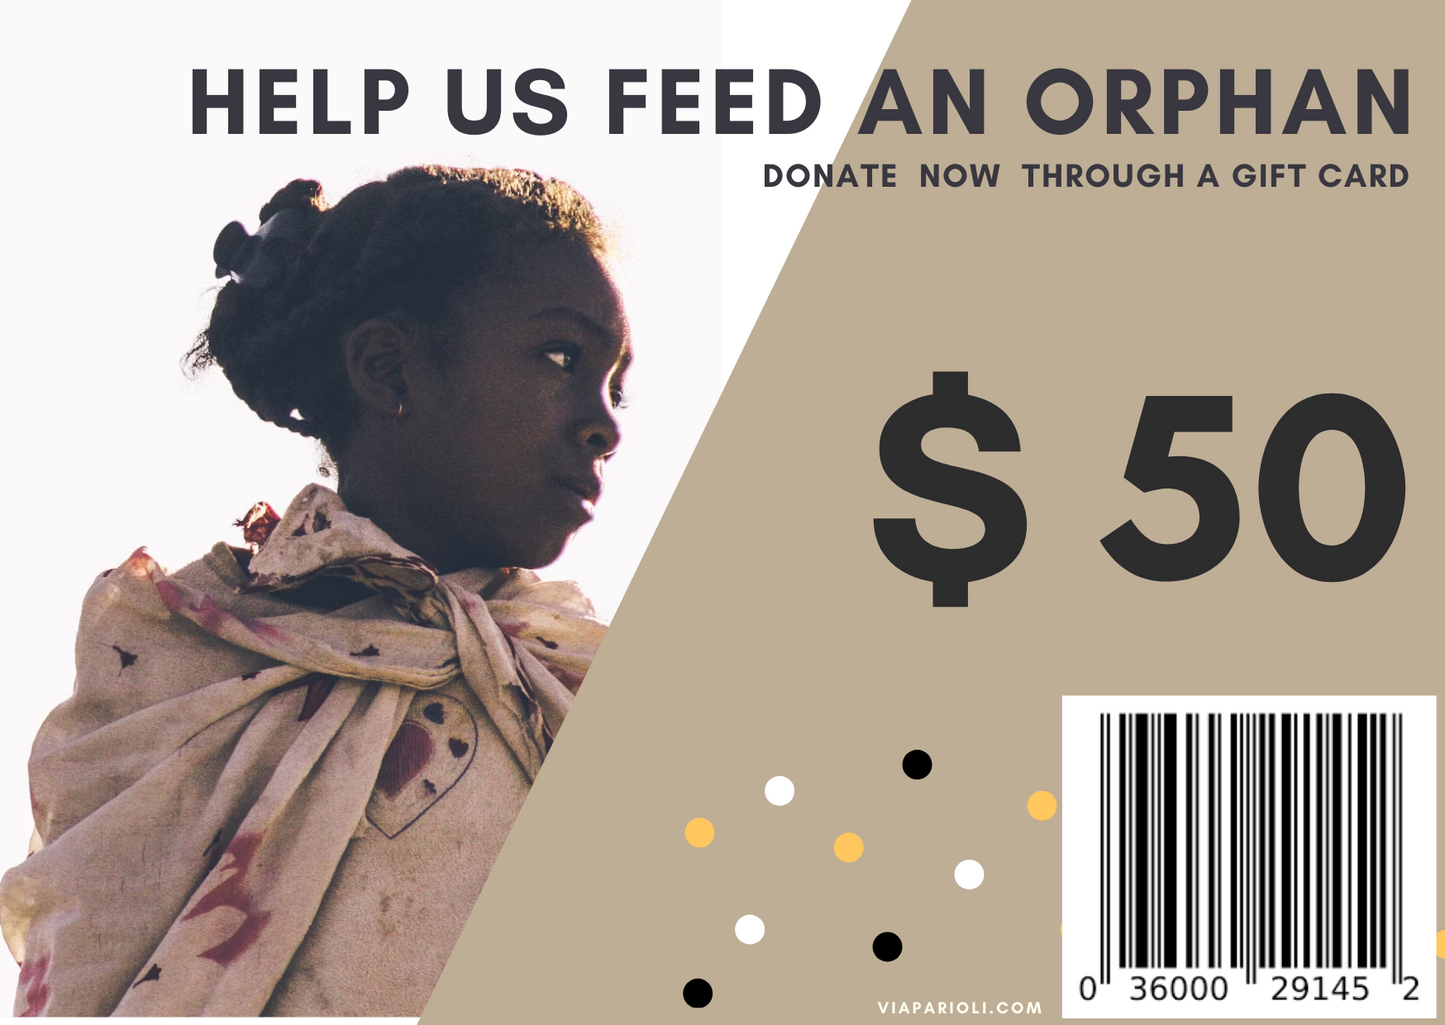 VIA PARIOLI  PARIOLI GIFTS - BUY A GIFT CARD AND FEED A CHILD IN MADAGASCAR.